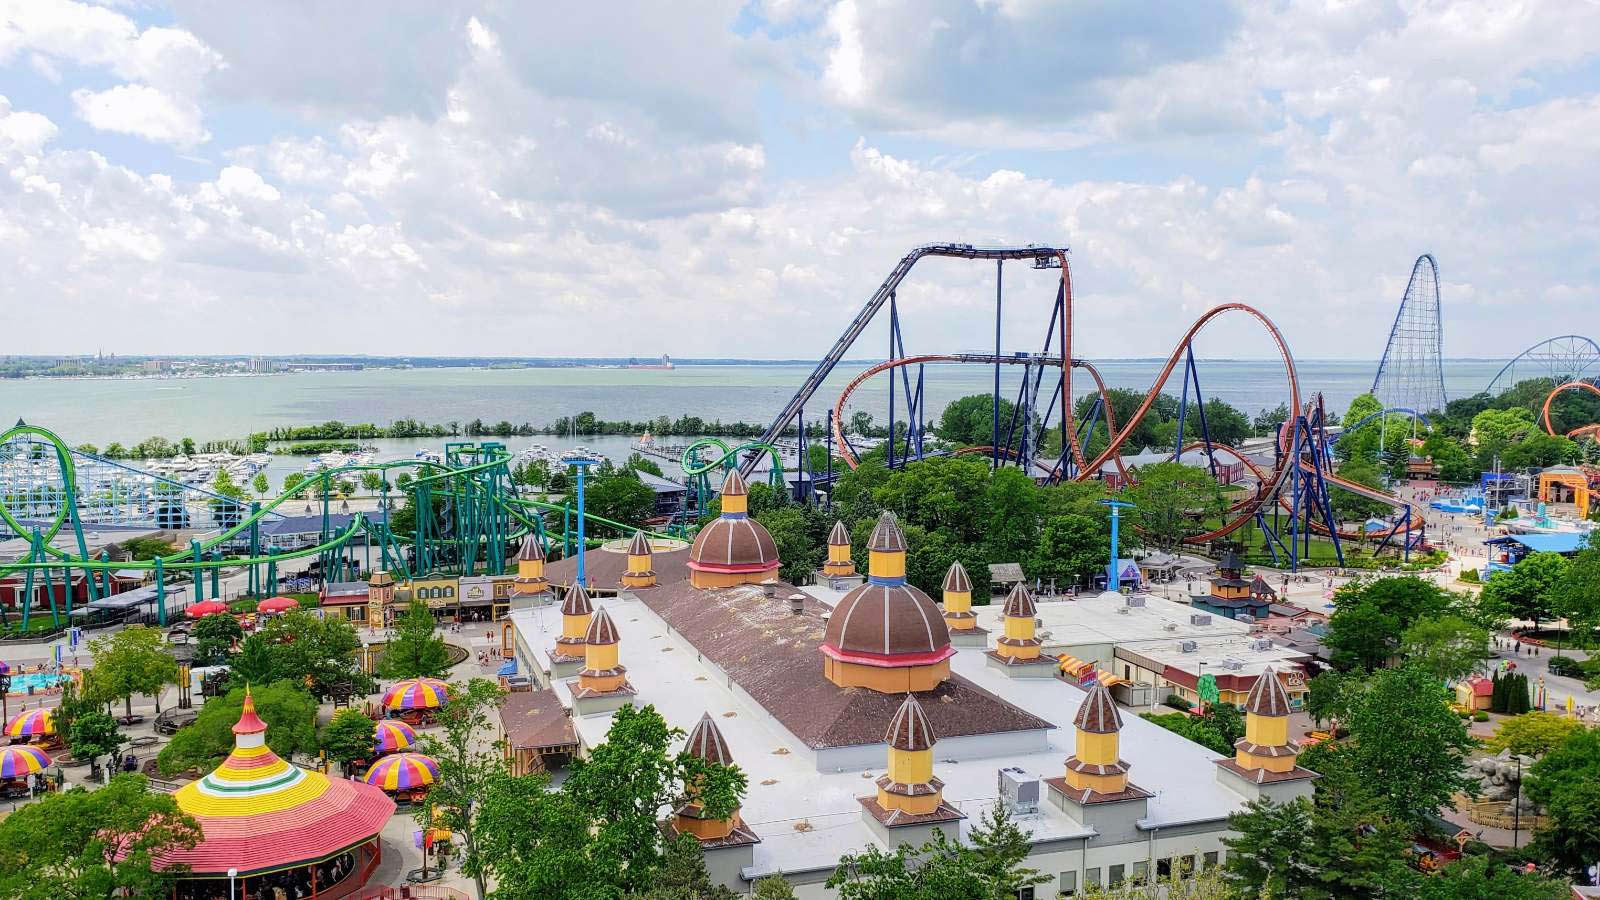 <p>Cedar Point Amusement Park is known as the “Roller Coaster Capital of the World” and is a must-visit destination for roller coaster enthusiasts. The park has various rides and attractions and is also home to a haunted carousel.</p>